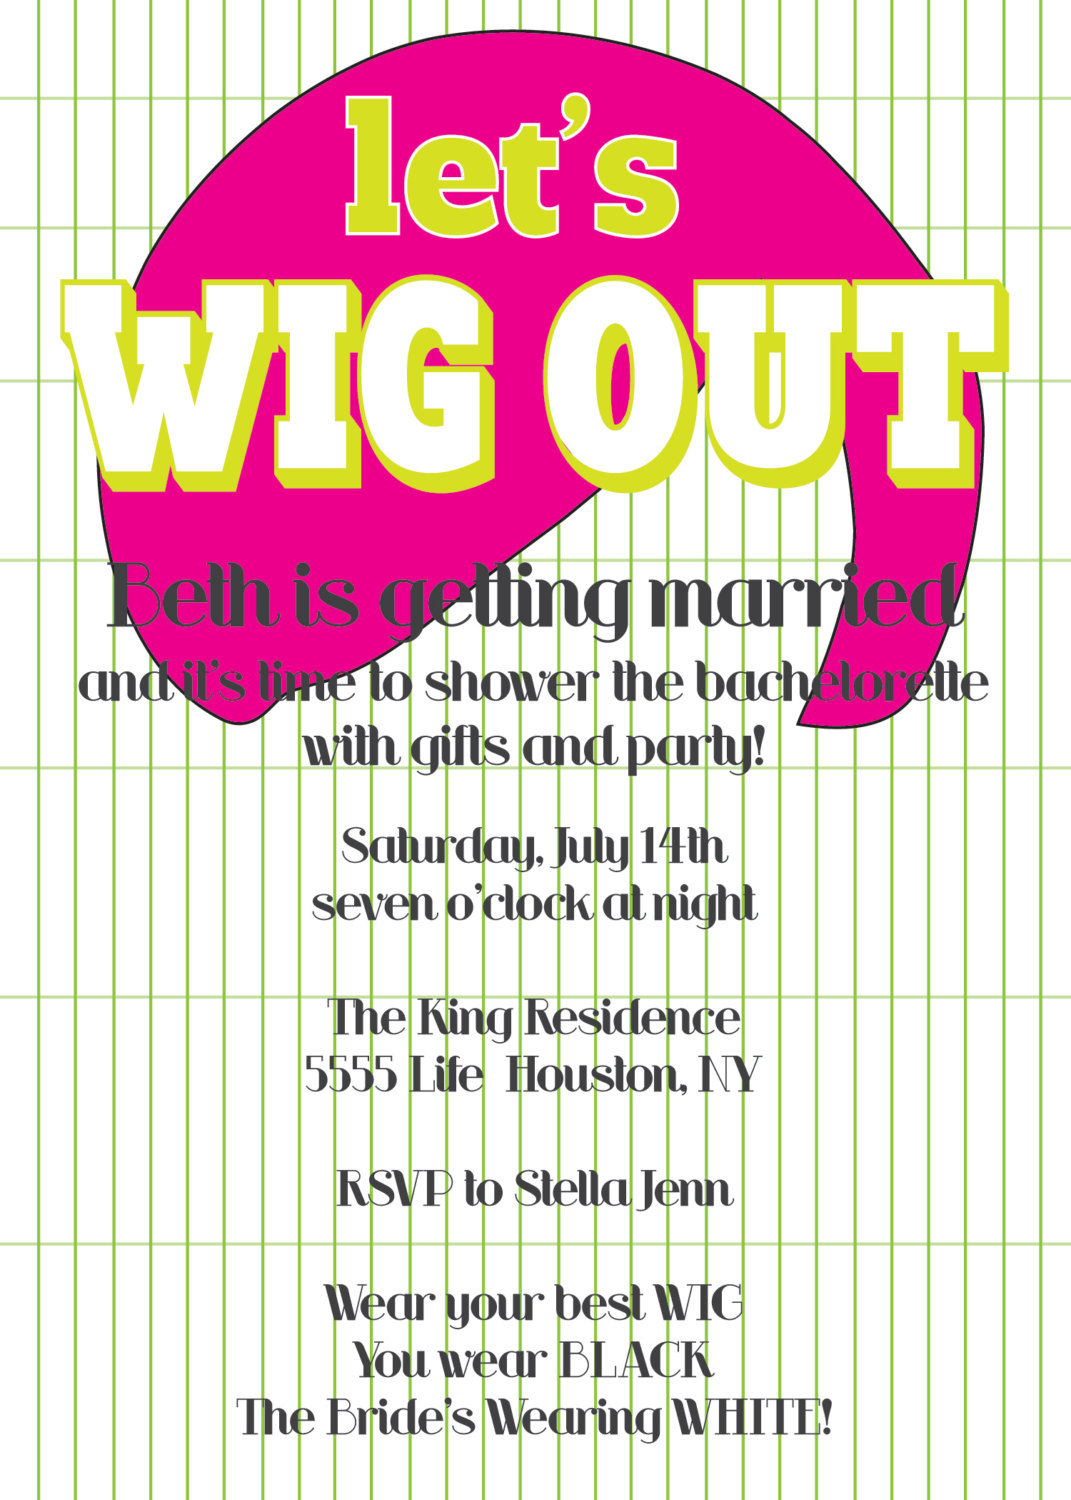 Items similar to Wig Out Theme Party Invite on Etsy